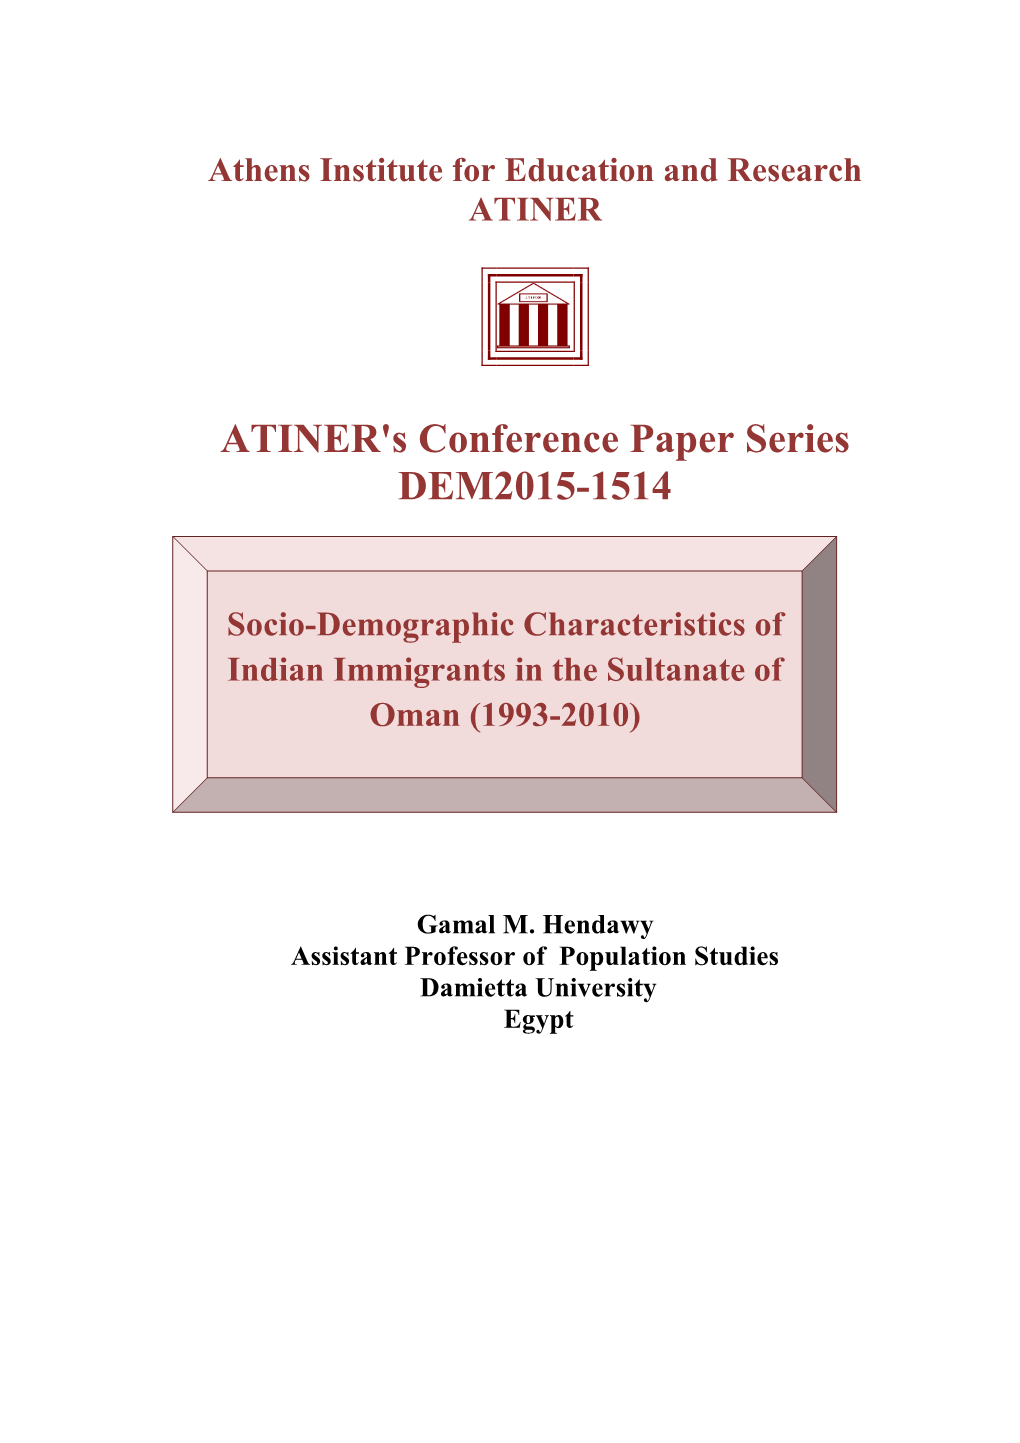 ATINER's Conference Paper Series DEM2015-1514